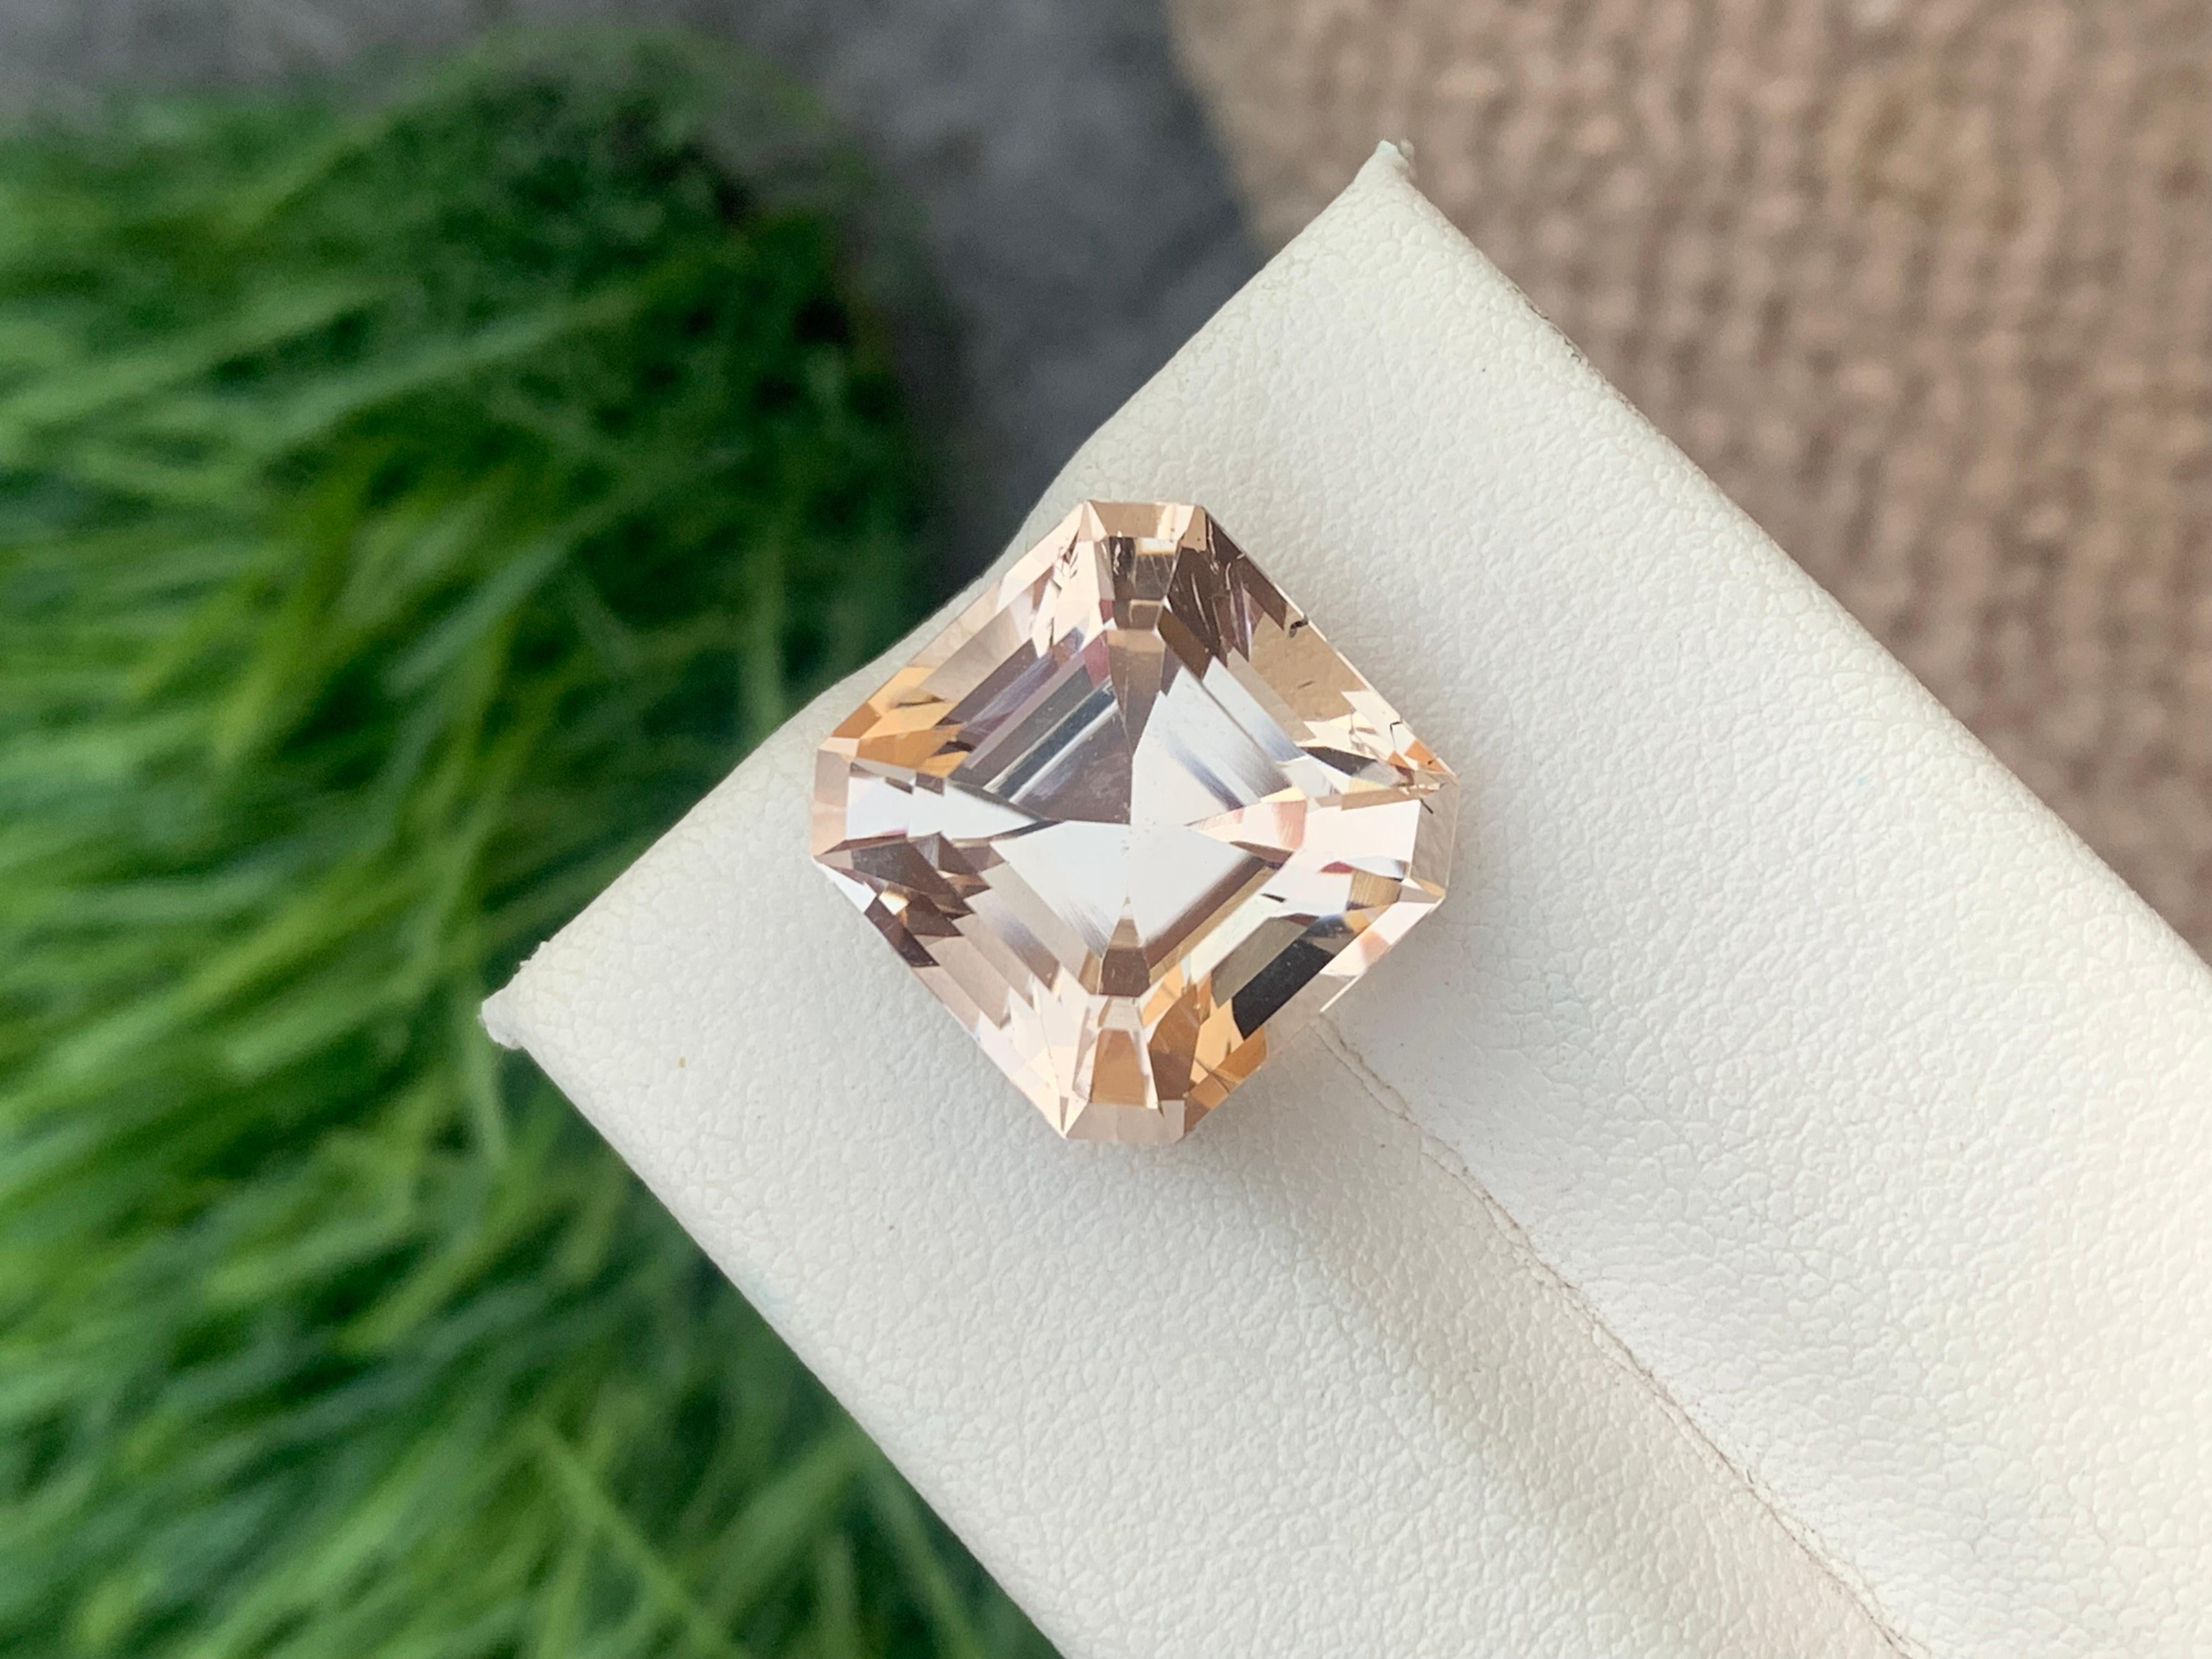 Gemstone Type : Morganite
Weight : 12.10 Carats
Dimensions : 13.9x13.7x10.6 Mm
Origin : Brazil
Clarity : SI
Shape: Asscher Cut
Color: Peach 
Certificate: On Demand
Morganite is believed to bring healing, compassion and promise to those who wear it.